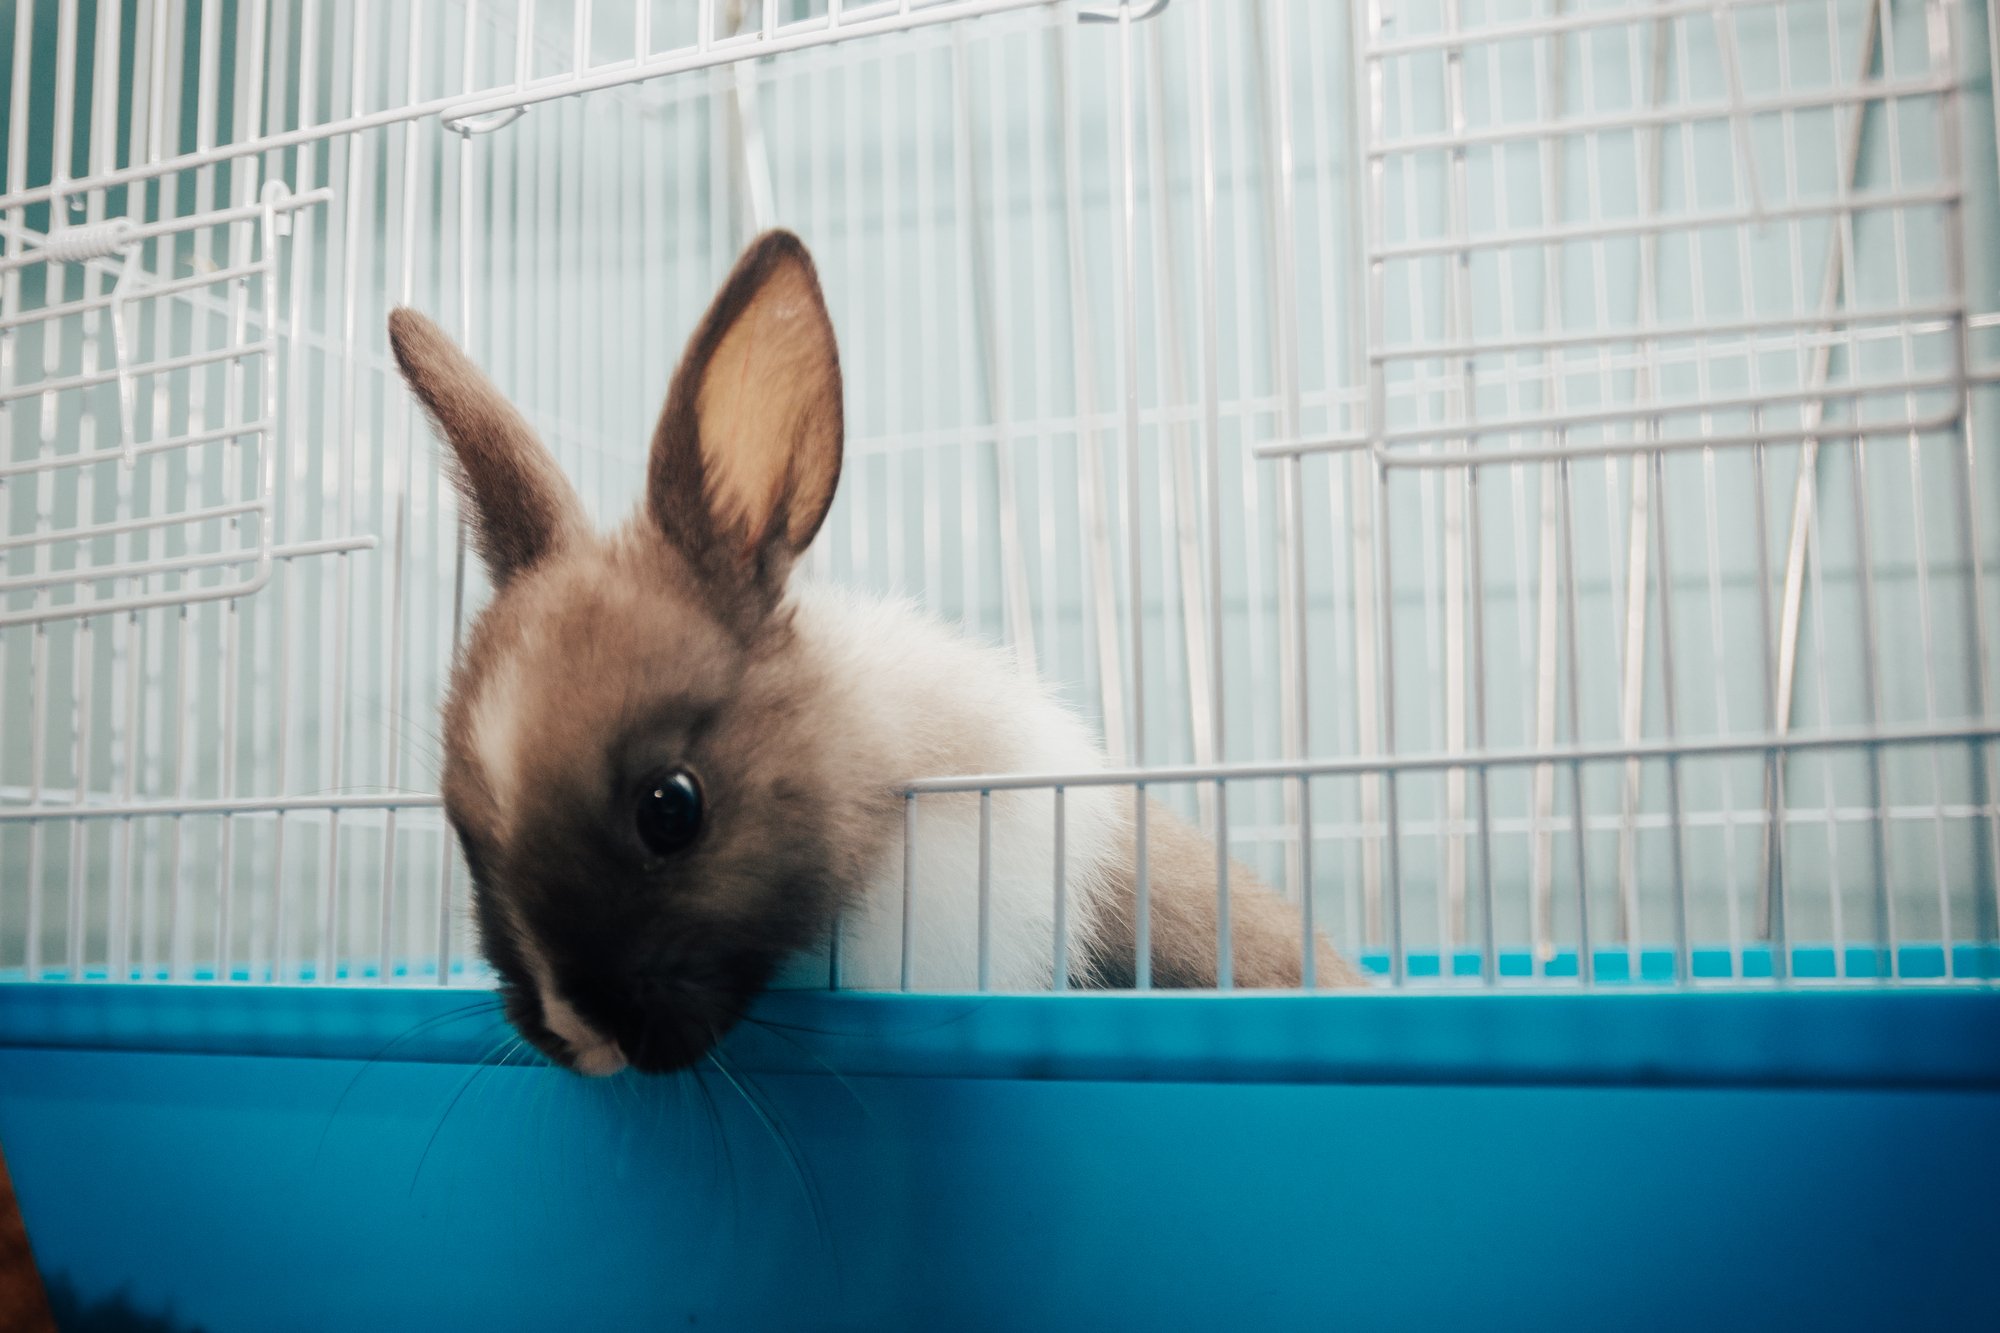 Factors Affecting Baby Bunny Jumping Ability